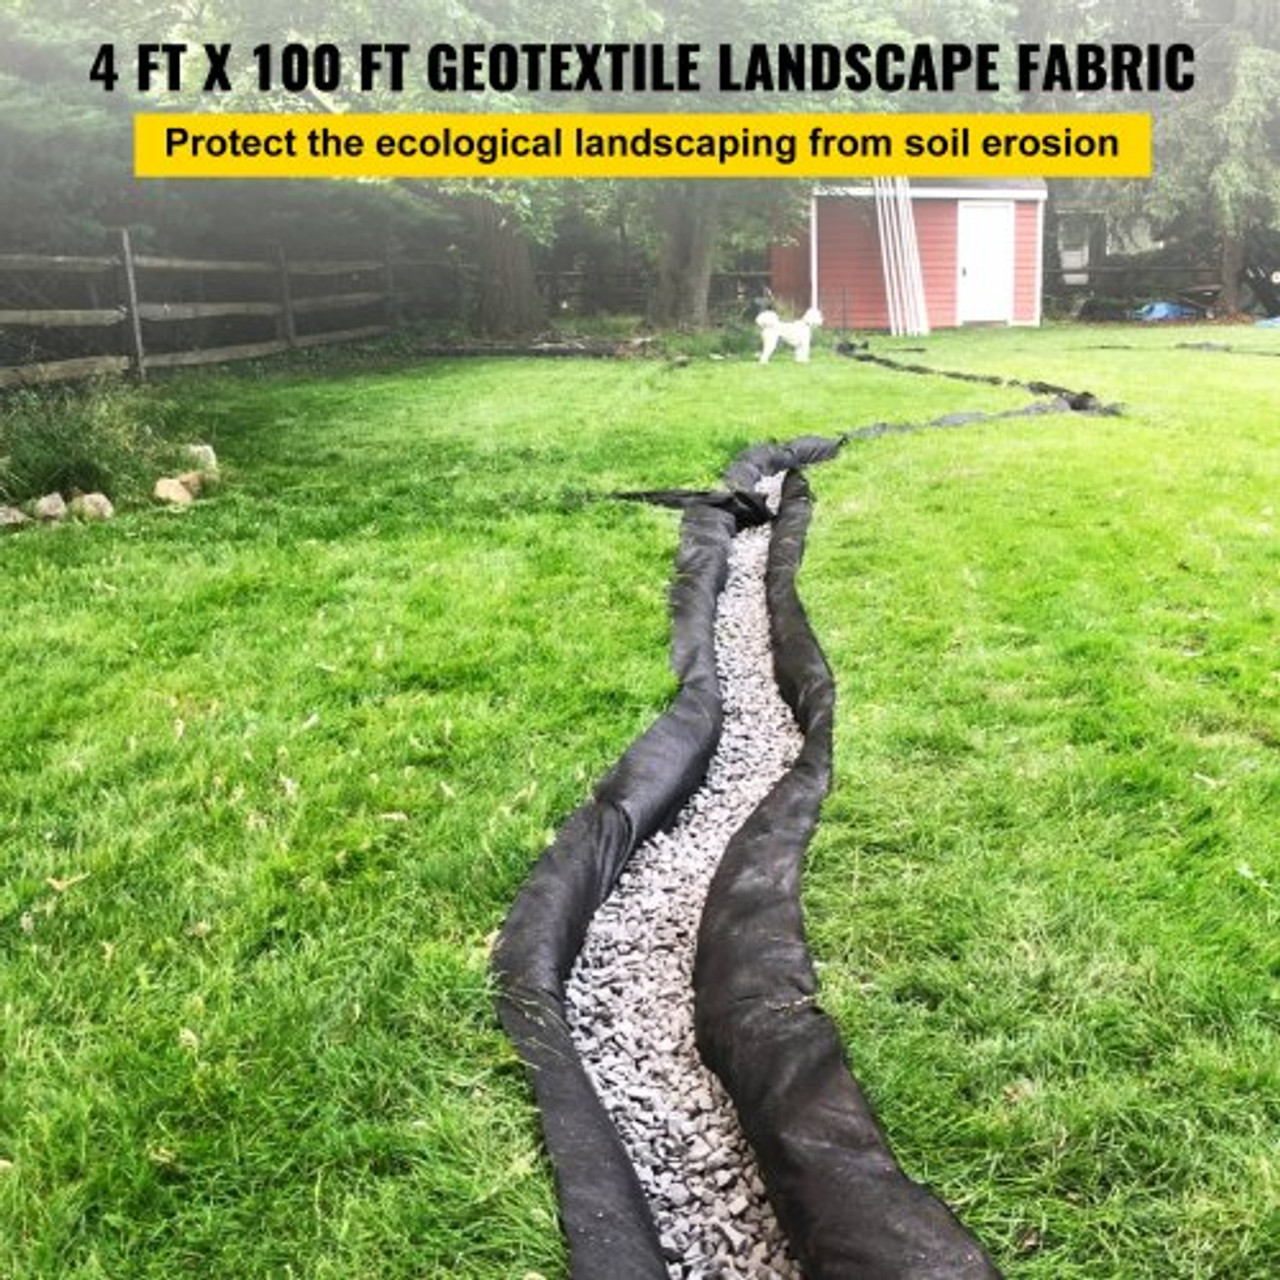 Garden Weed Barrier Fabric, 8OZ Heavy Duty Geotextile Landscape Fabric, 4ft x 100ft Non-Woven Weed Block Gardening Mat for Ground Cover, Weed Control Cloth, Landscaping, Underlayment, Black